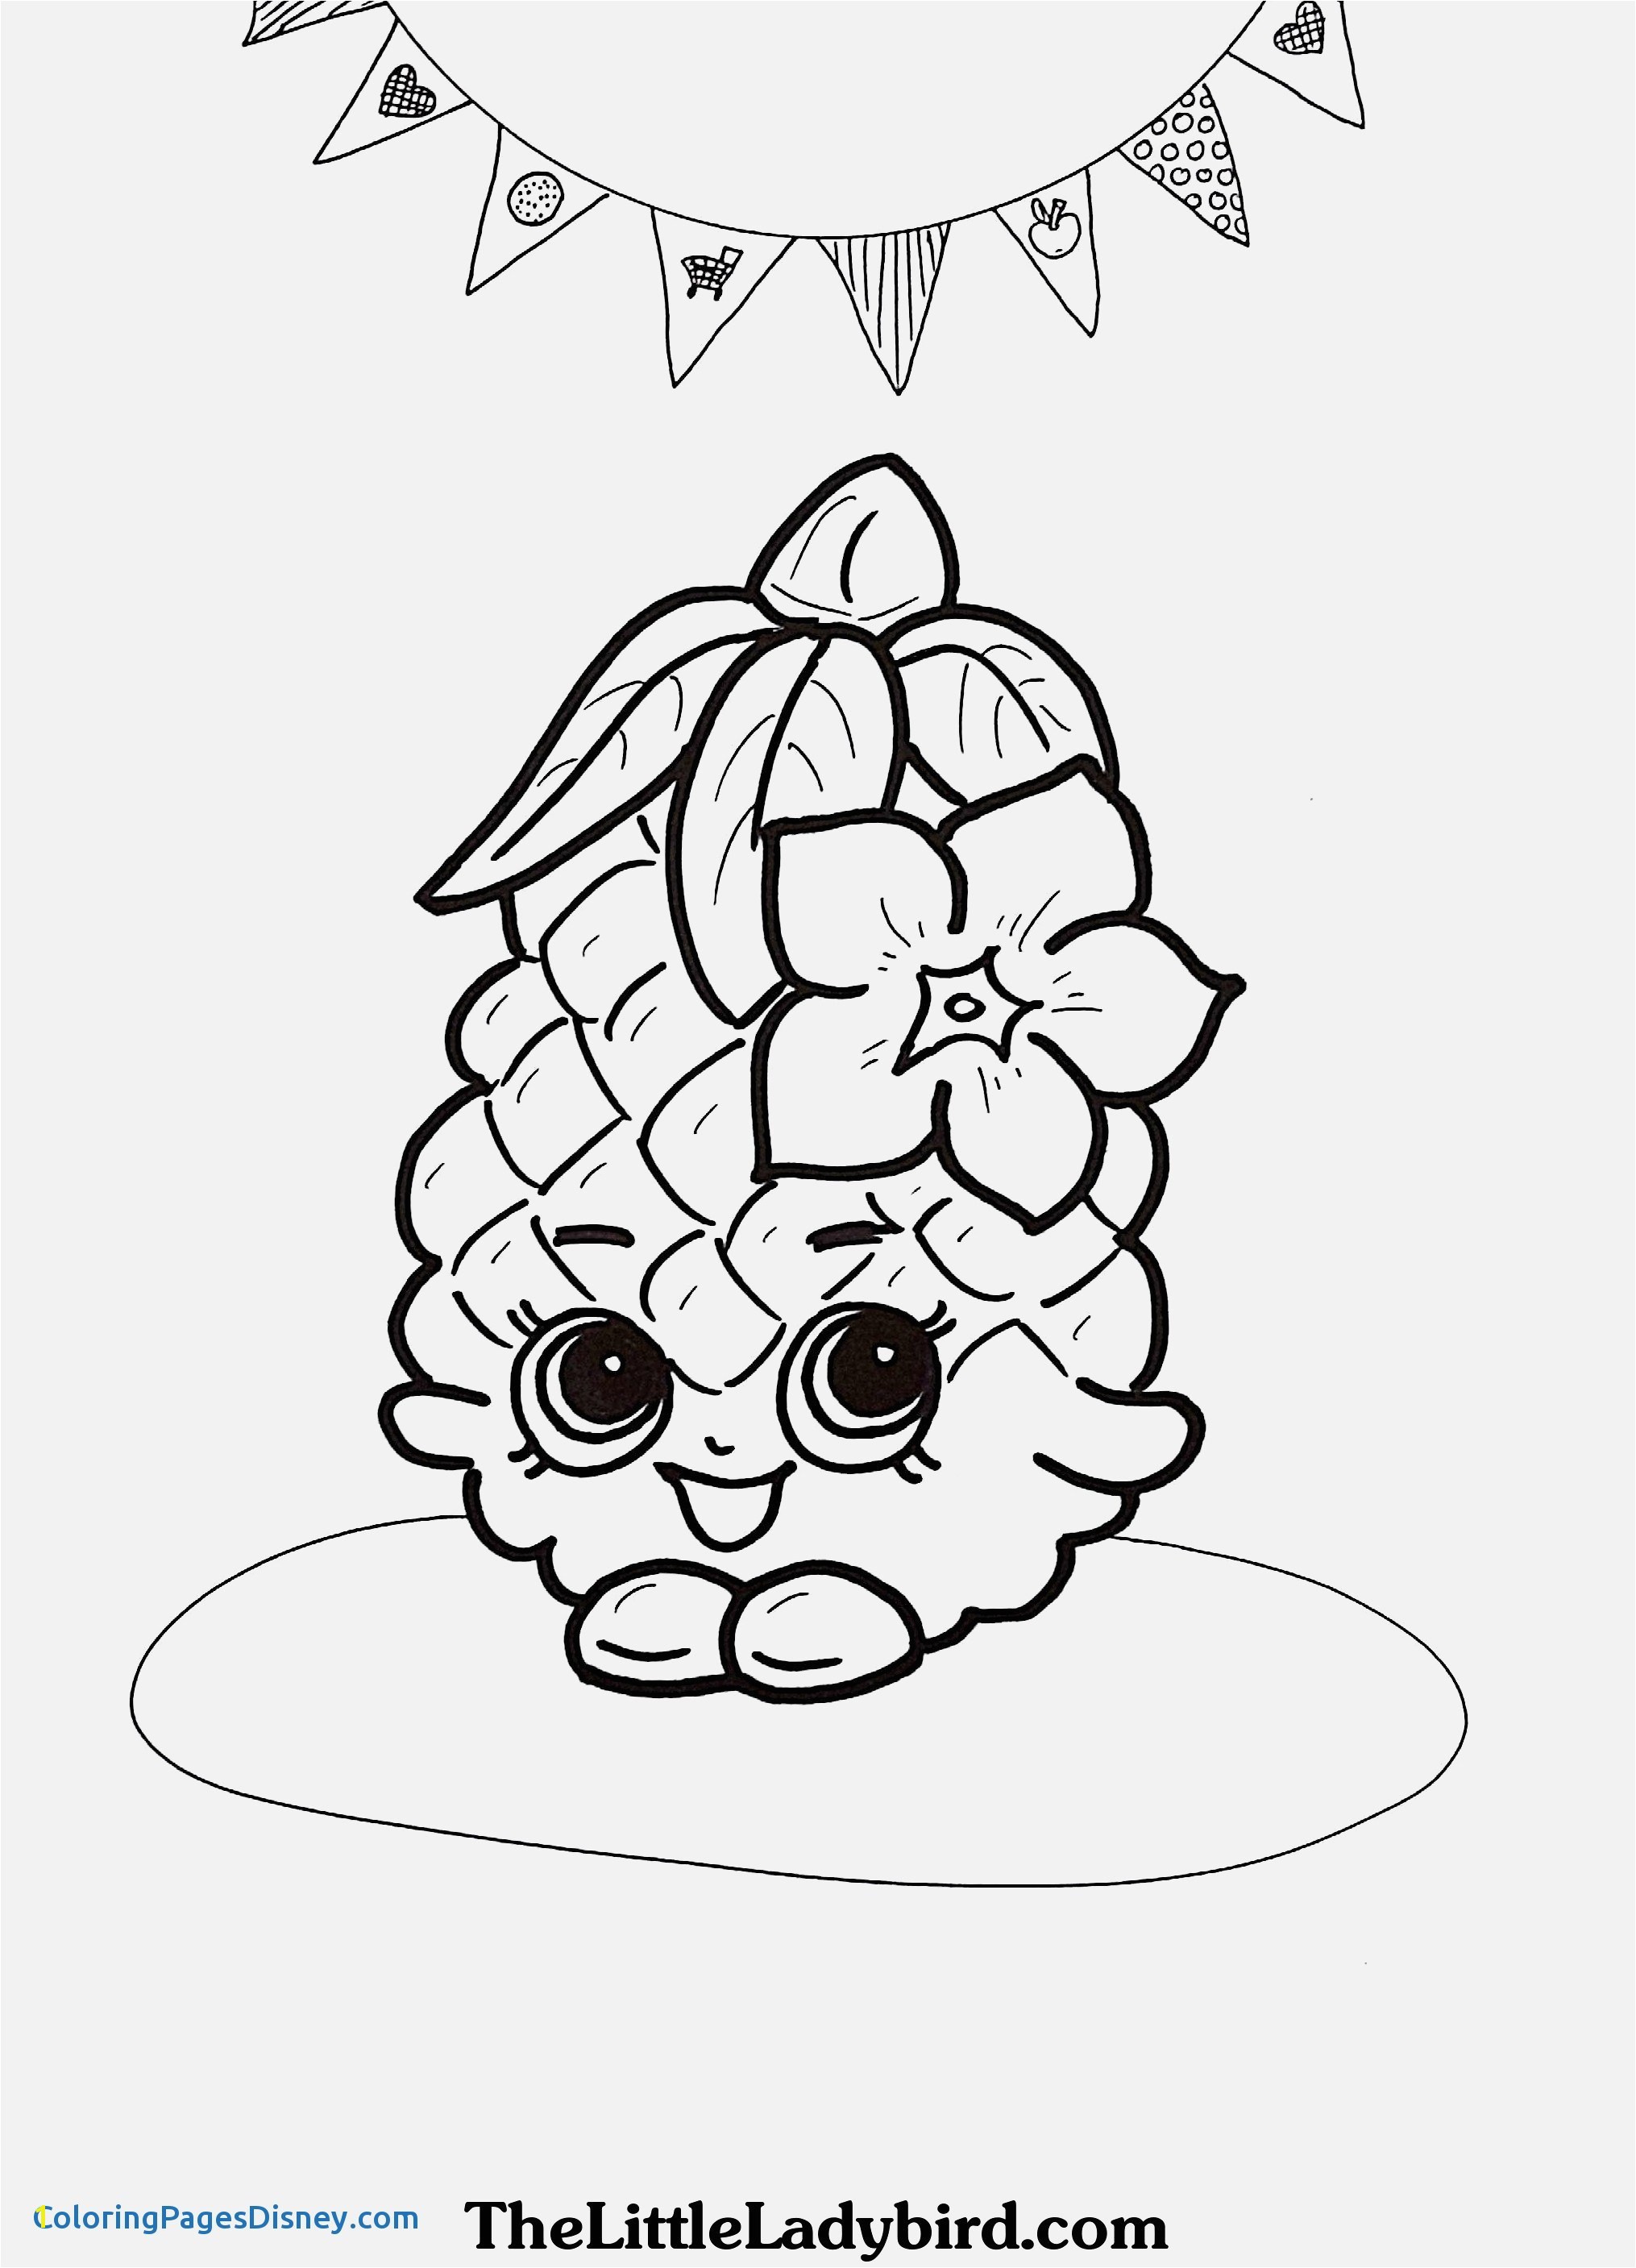 Tekken Coloring Pages Tekken Coloring Pages Fresh Adam and Eve Coloring Pages Printable